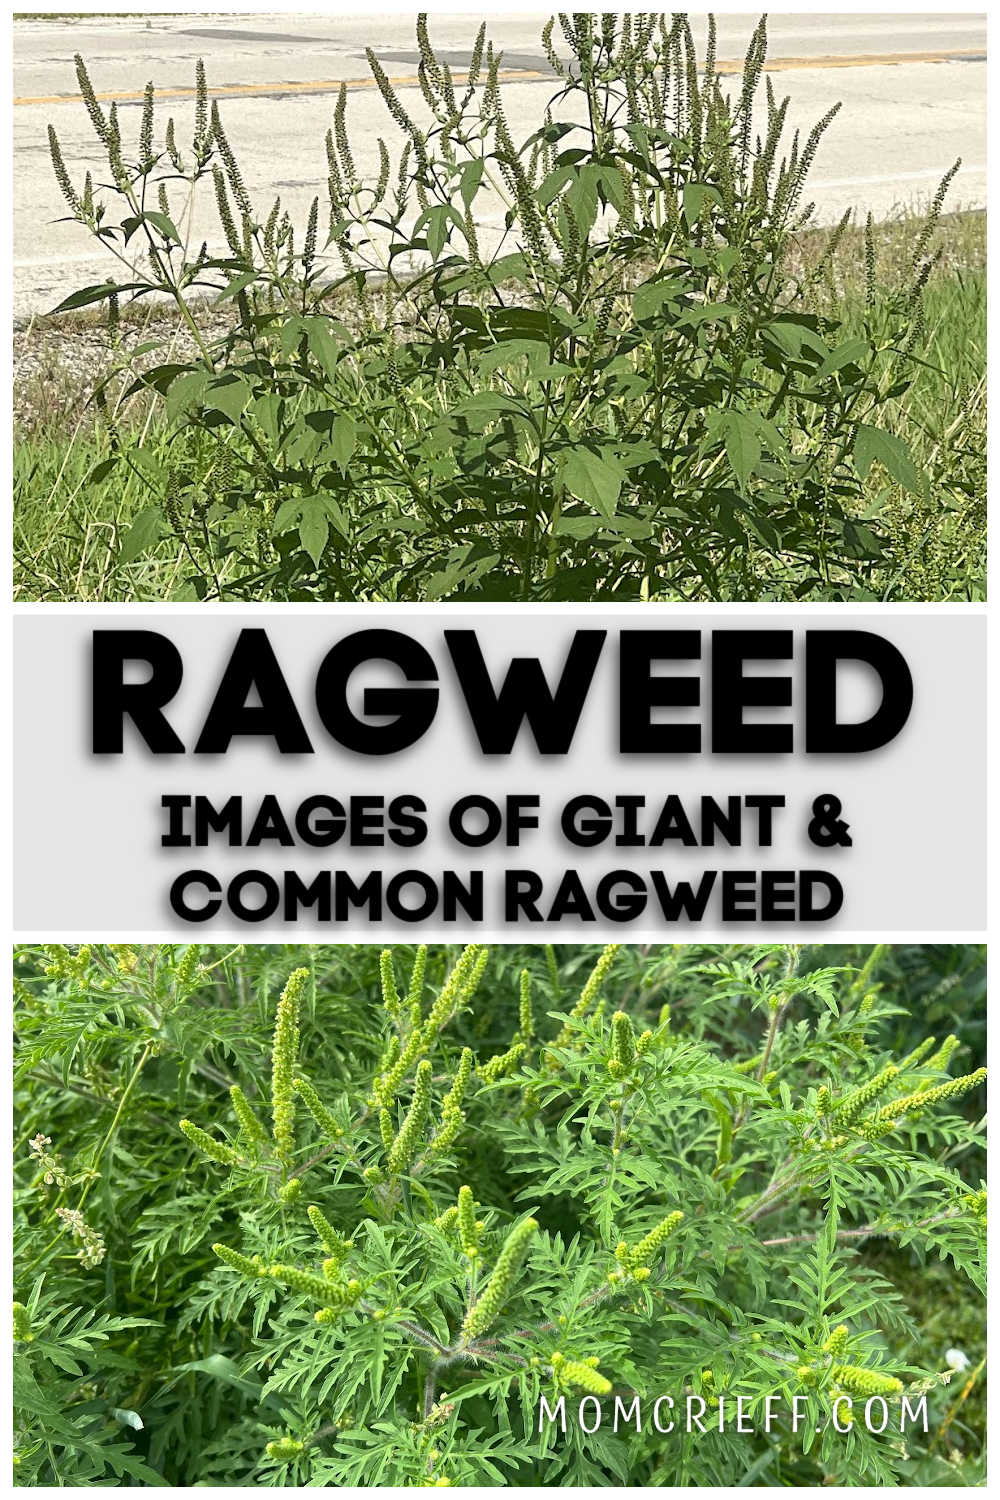 comparison of common and giant ragweed plants